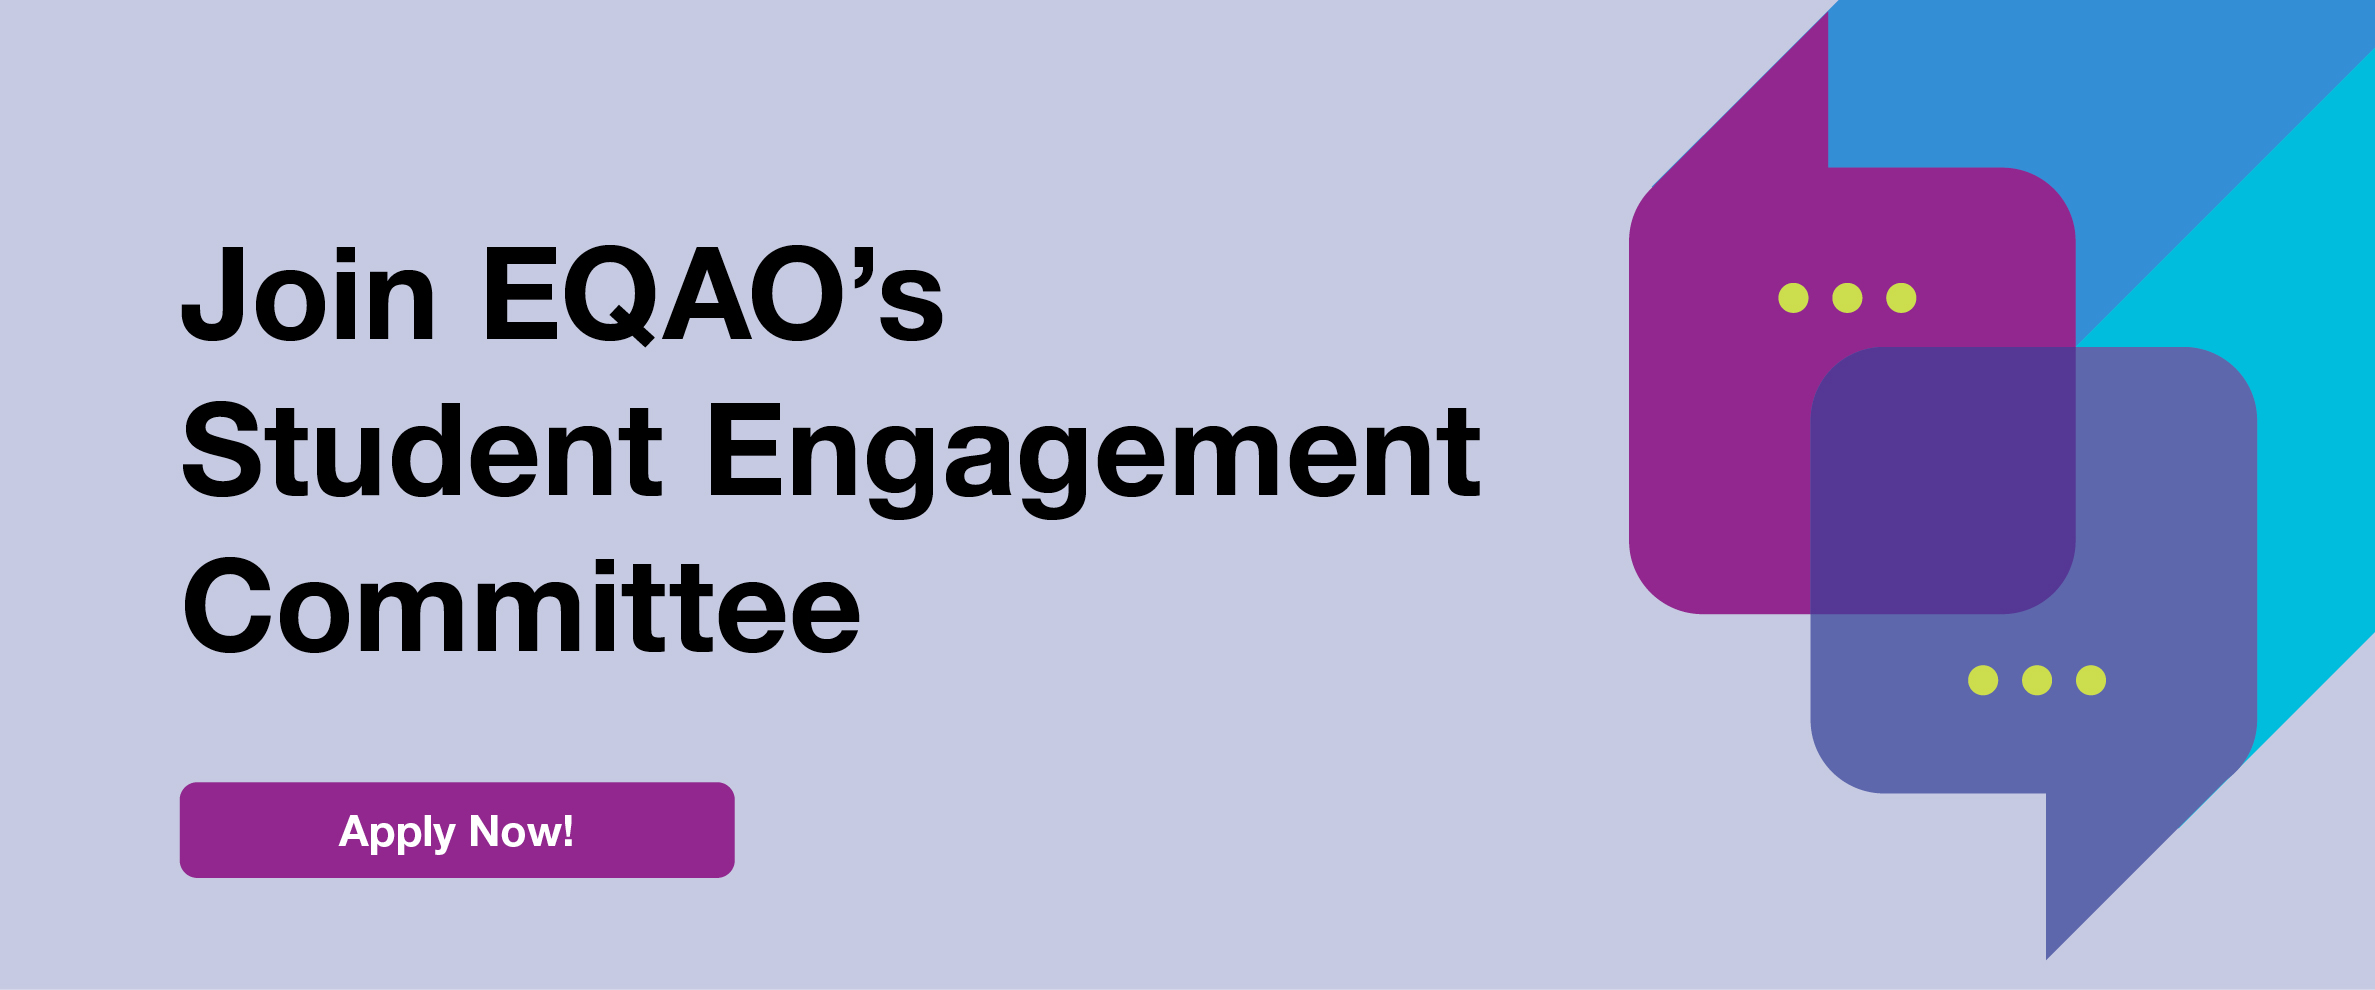 Join EQAO's Student Engagement Committee. Apply Now!